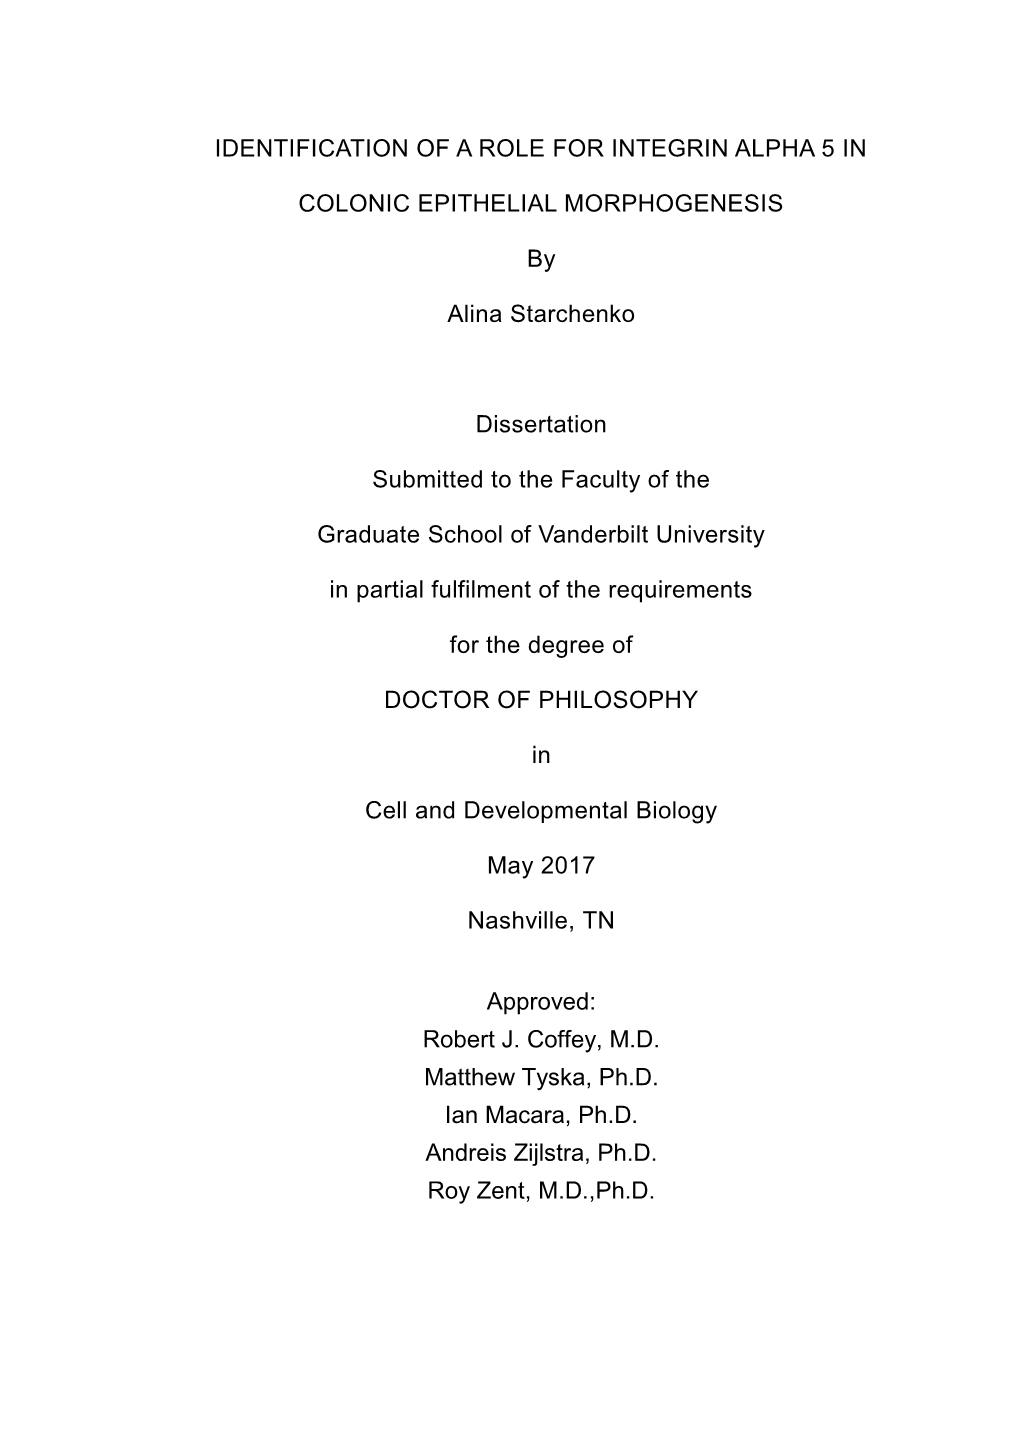 IDENTIFICATION of a ROLE for INTEGRIN ALPHA 5 in COLONIC EPITHELIAL MORPHOGENESIS by Alina Starchenko Dissertation Submitted To